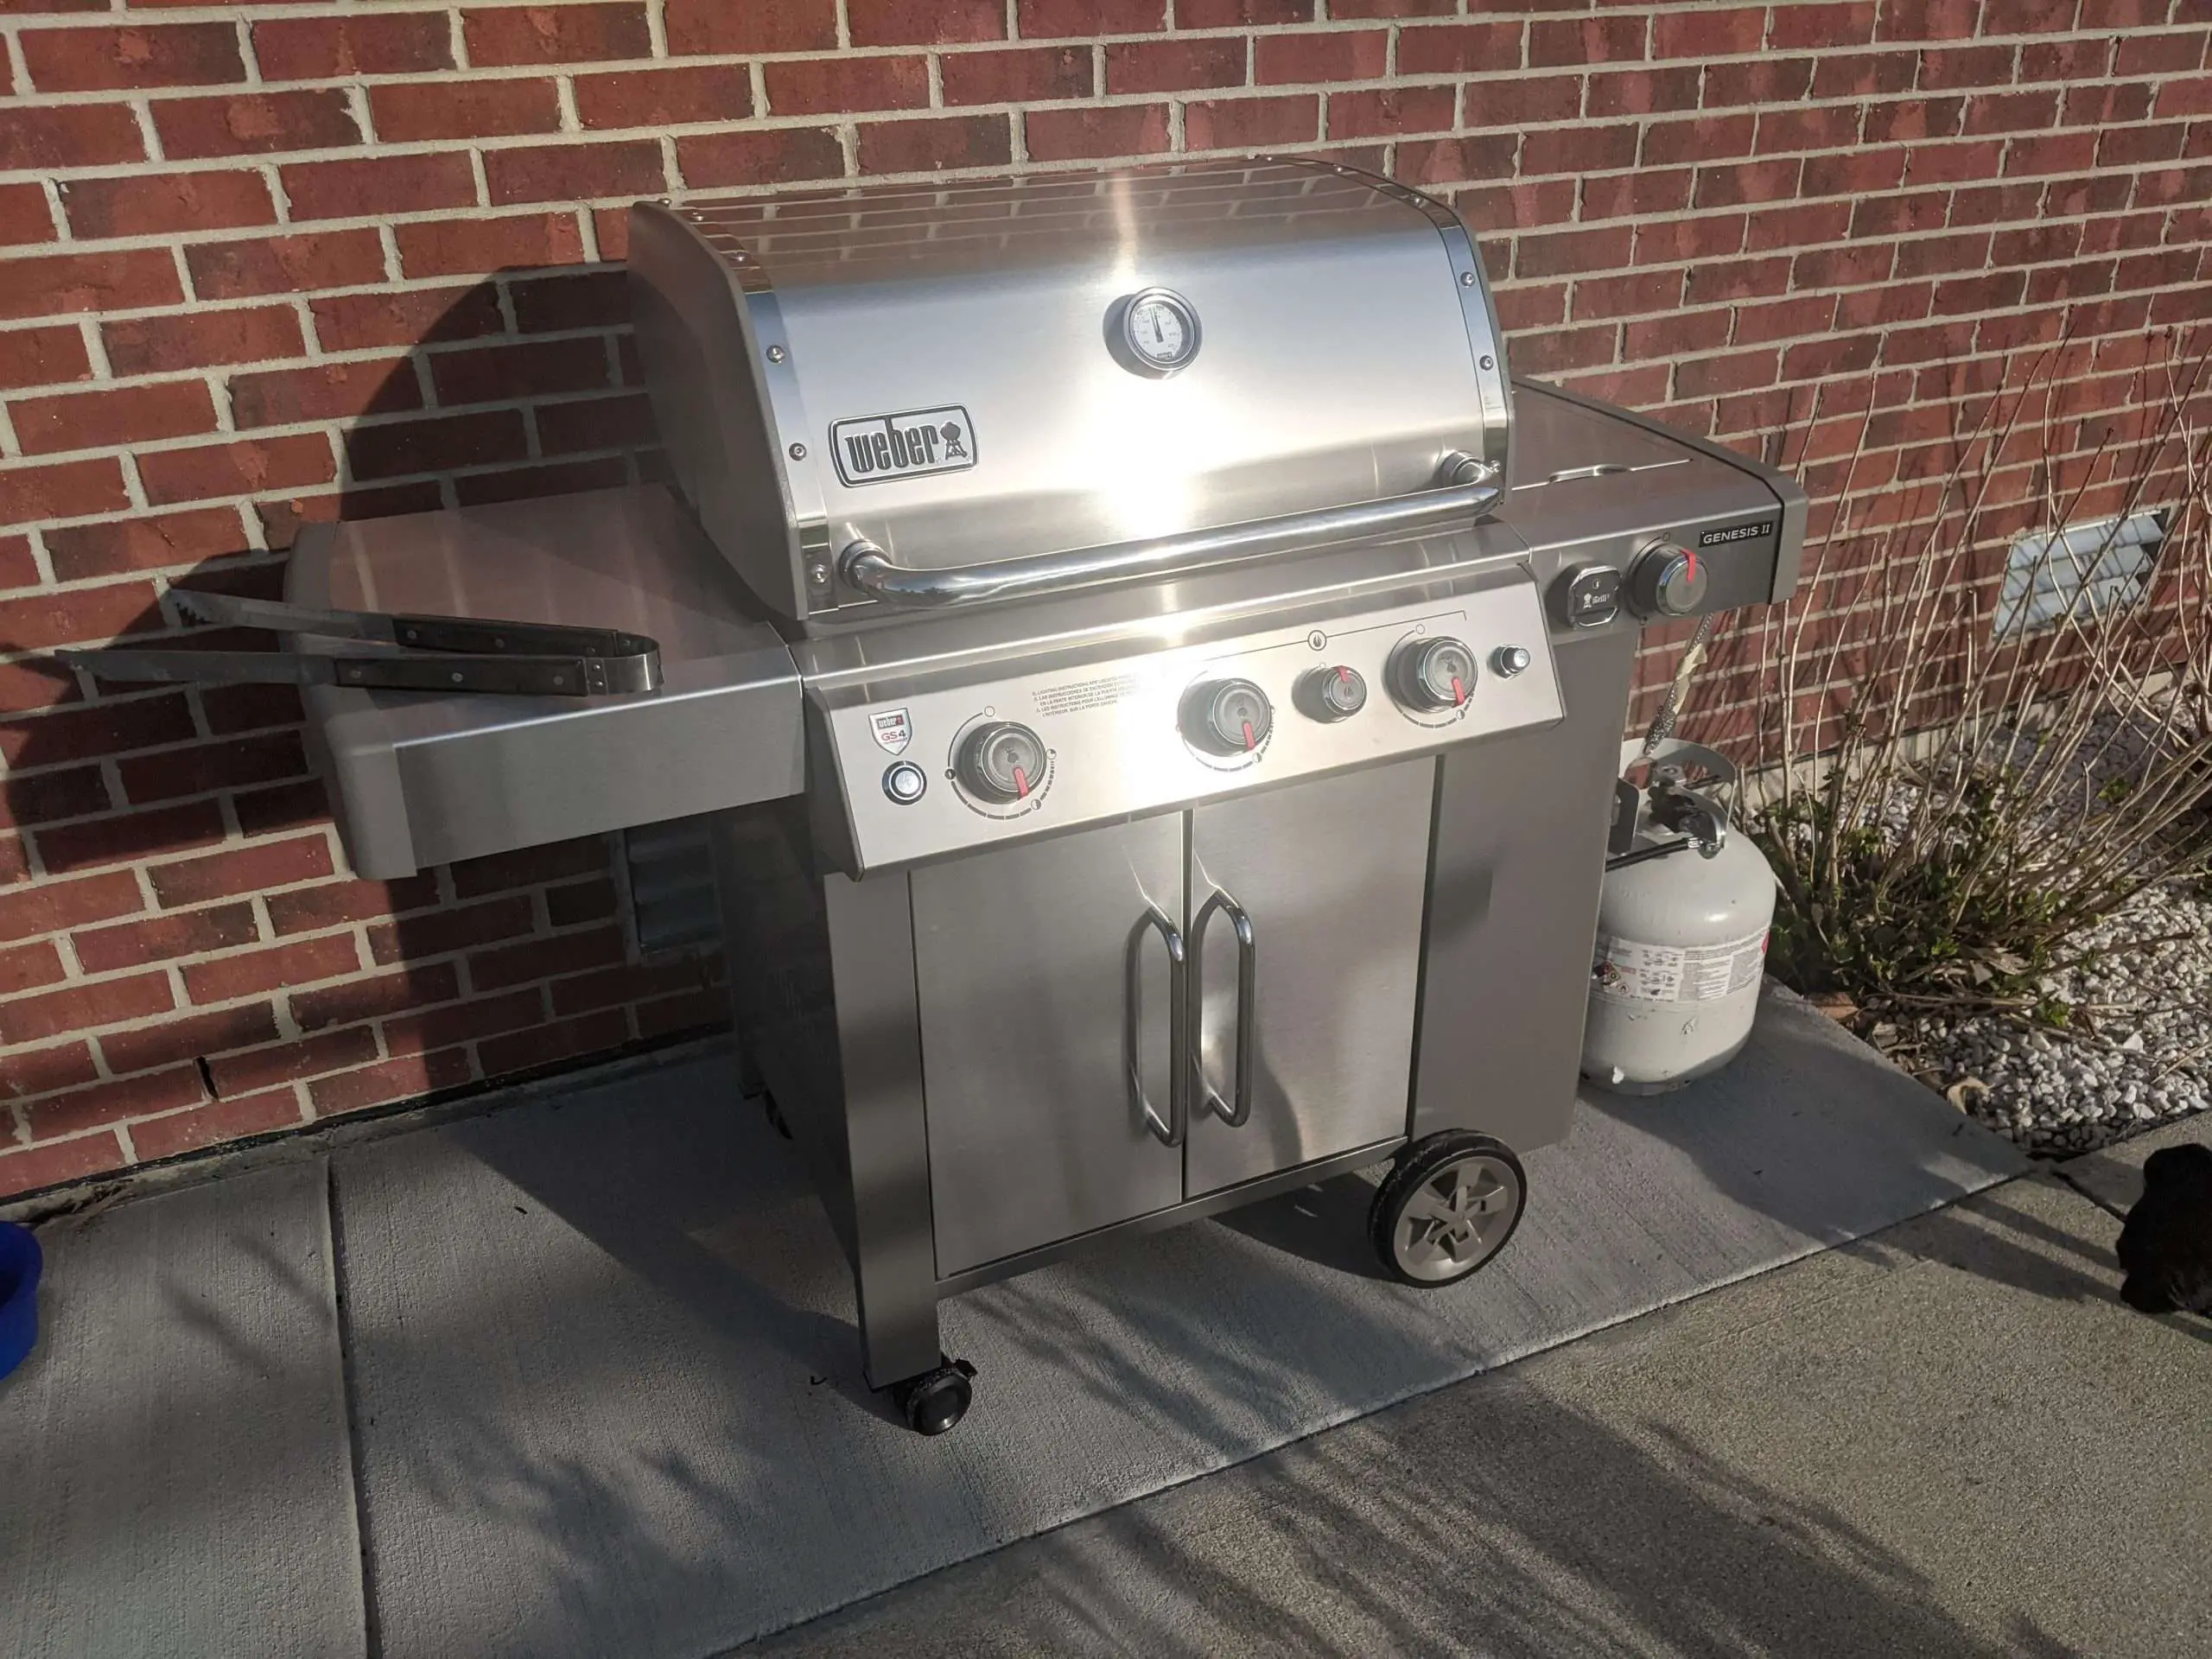 First Stainless Steel grill for me. What